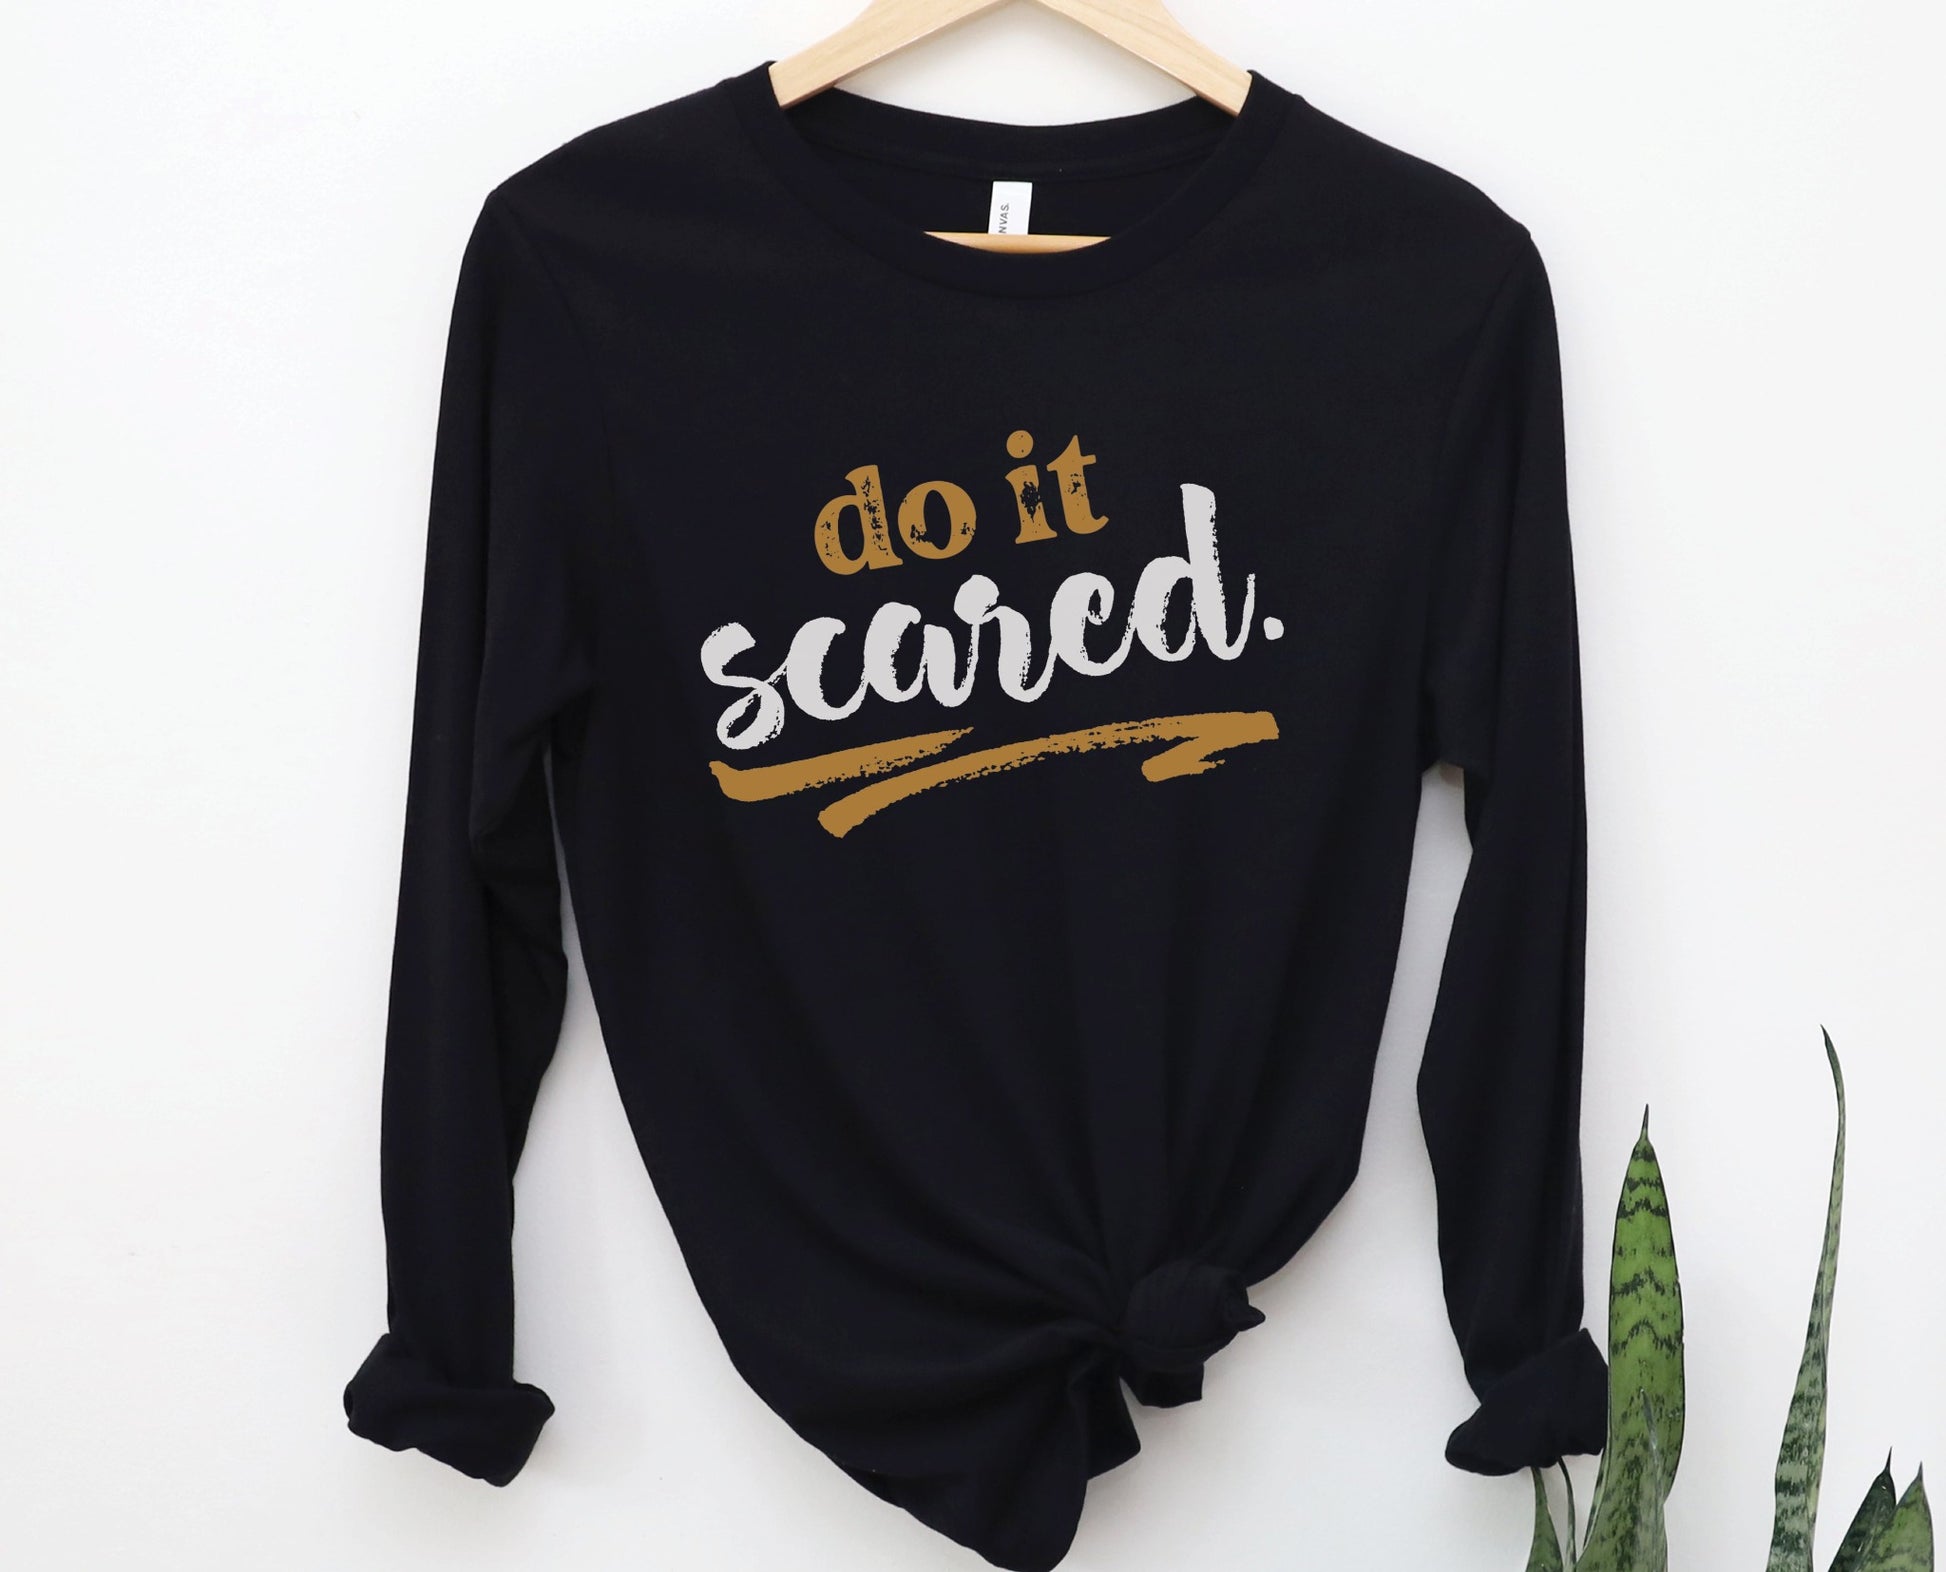 Do It Scared faith over fear 2 Timothy 1:7 do not fear bible verse Christian aesthetic design printed in white and gold on soft black unisex long sleeve tee shirt for women and men